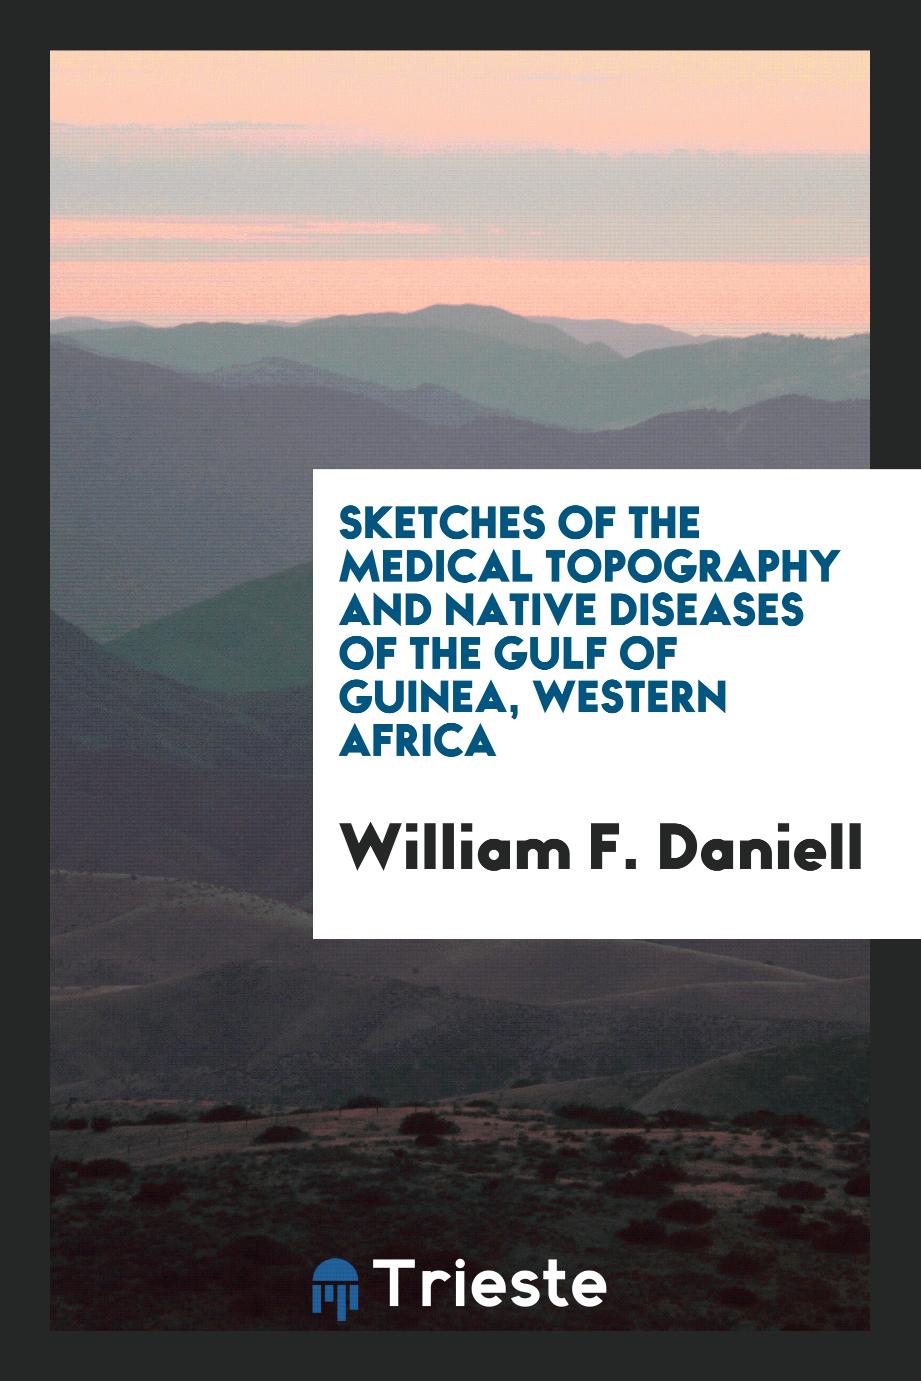 Sketches of the medical topography and native diseases of the Gulf of Guinea, Western Africa